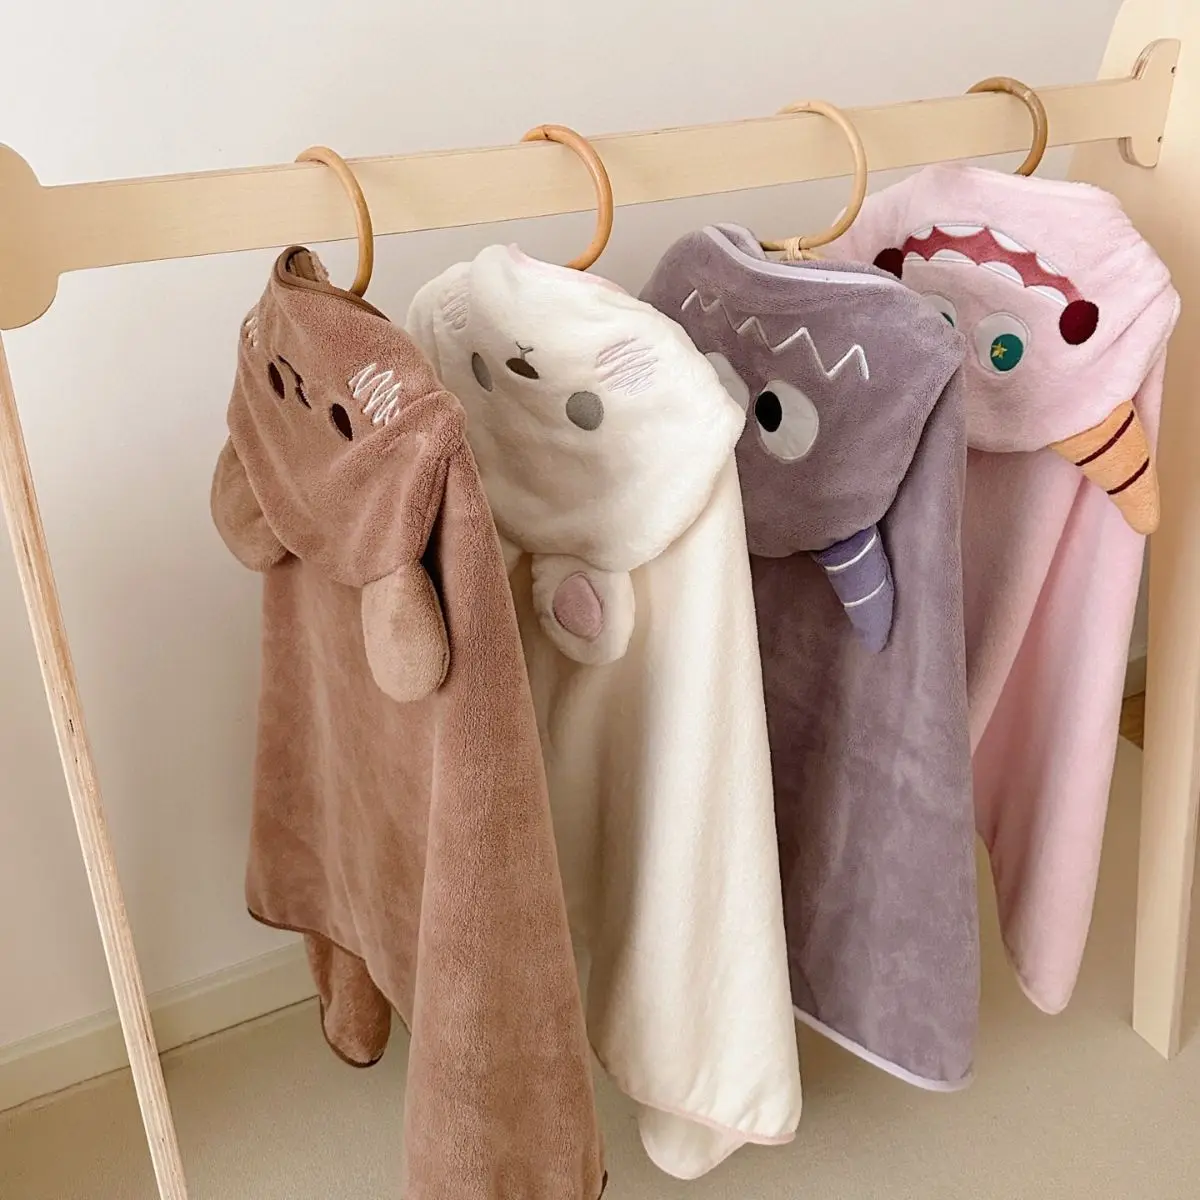 Baby Boy Girl Animal Hooded Bath Towel Toddler Towels with Hood Soft Cotton Beach Swimming Washcloth